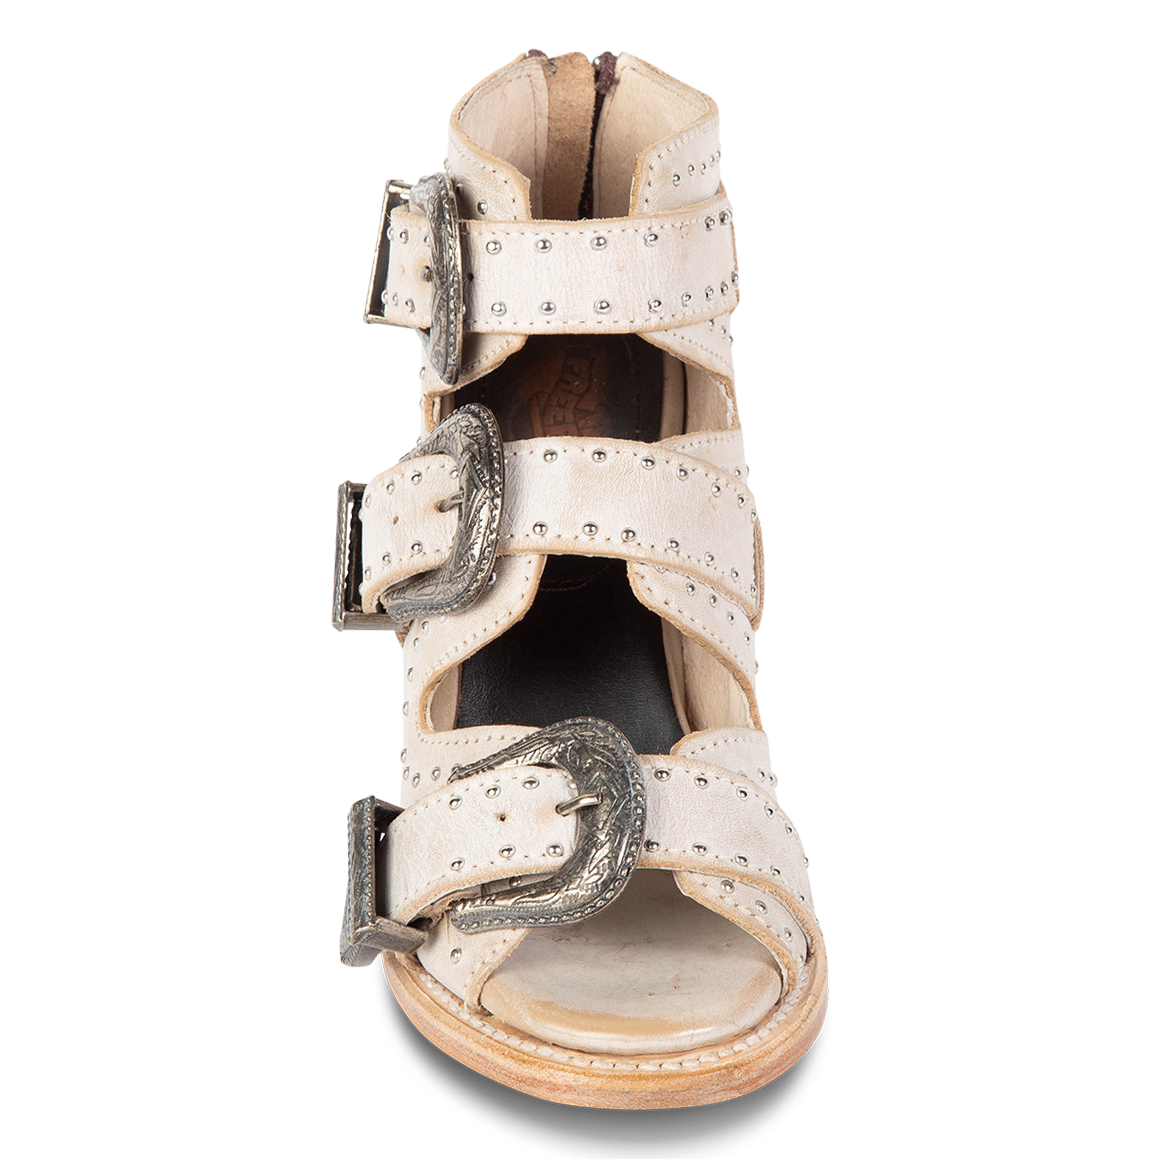 Front view showing open toe construction with adjustable studded leather straps on FREEBIRD women's Violet beige sandal